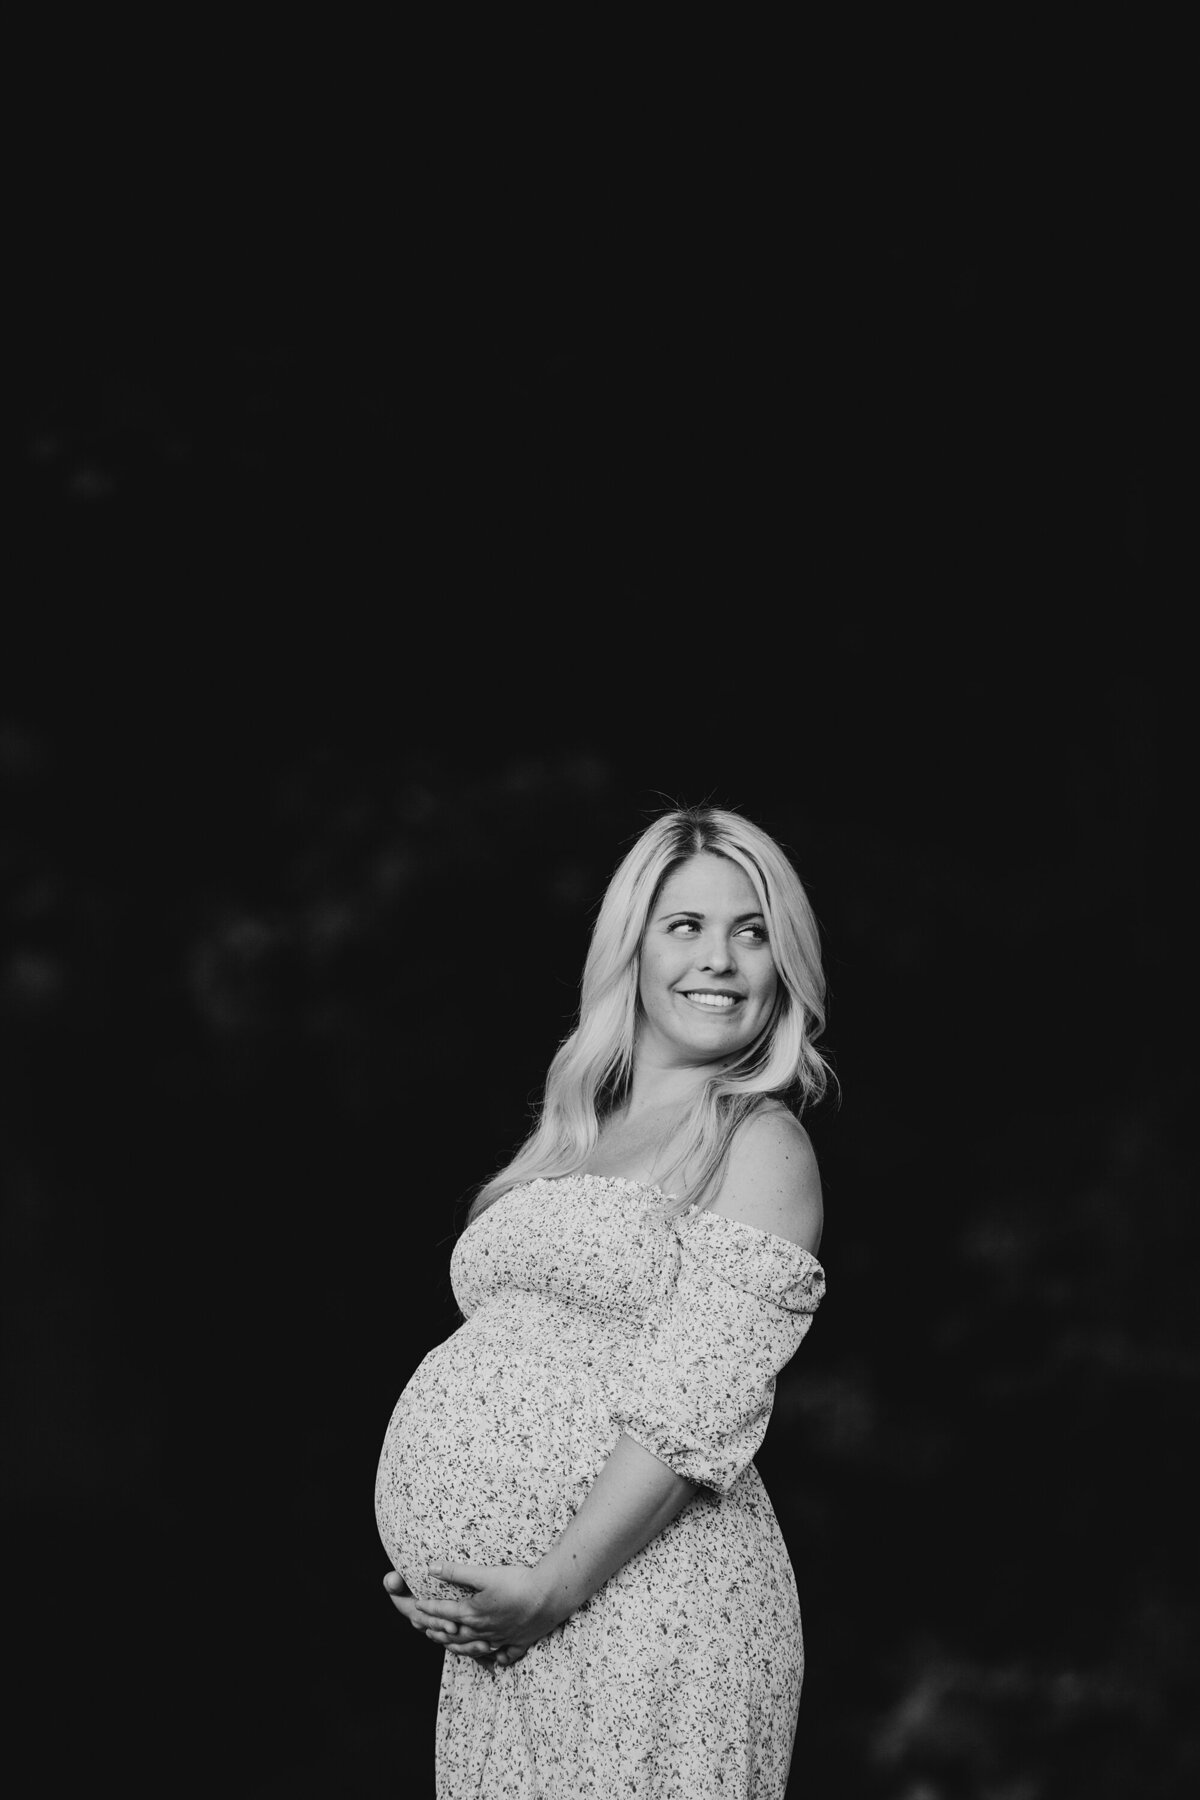 King-of-prussia-maternity-photographer-012